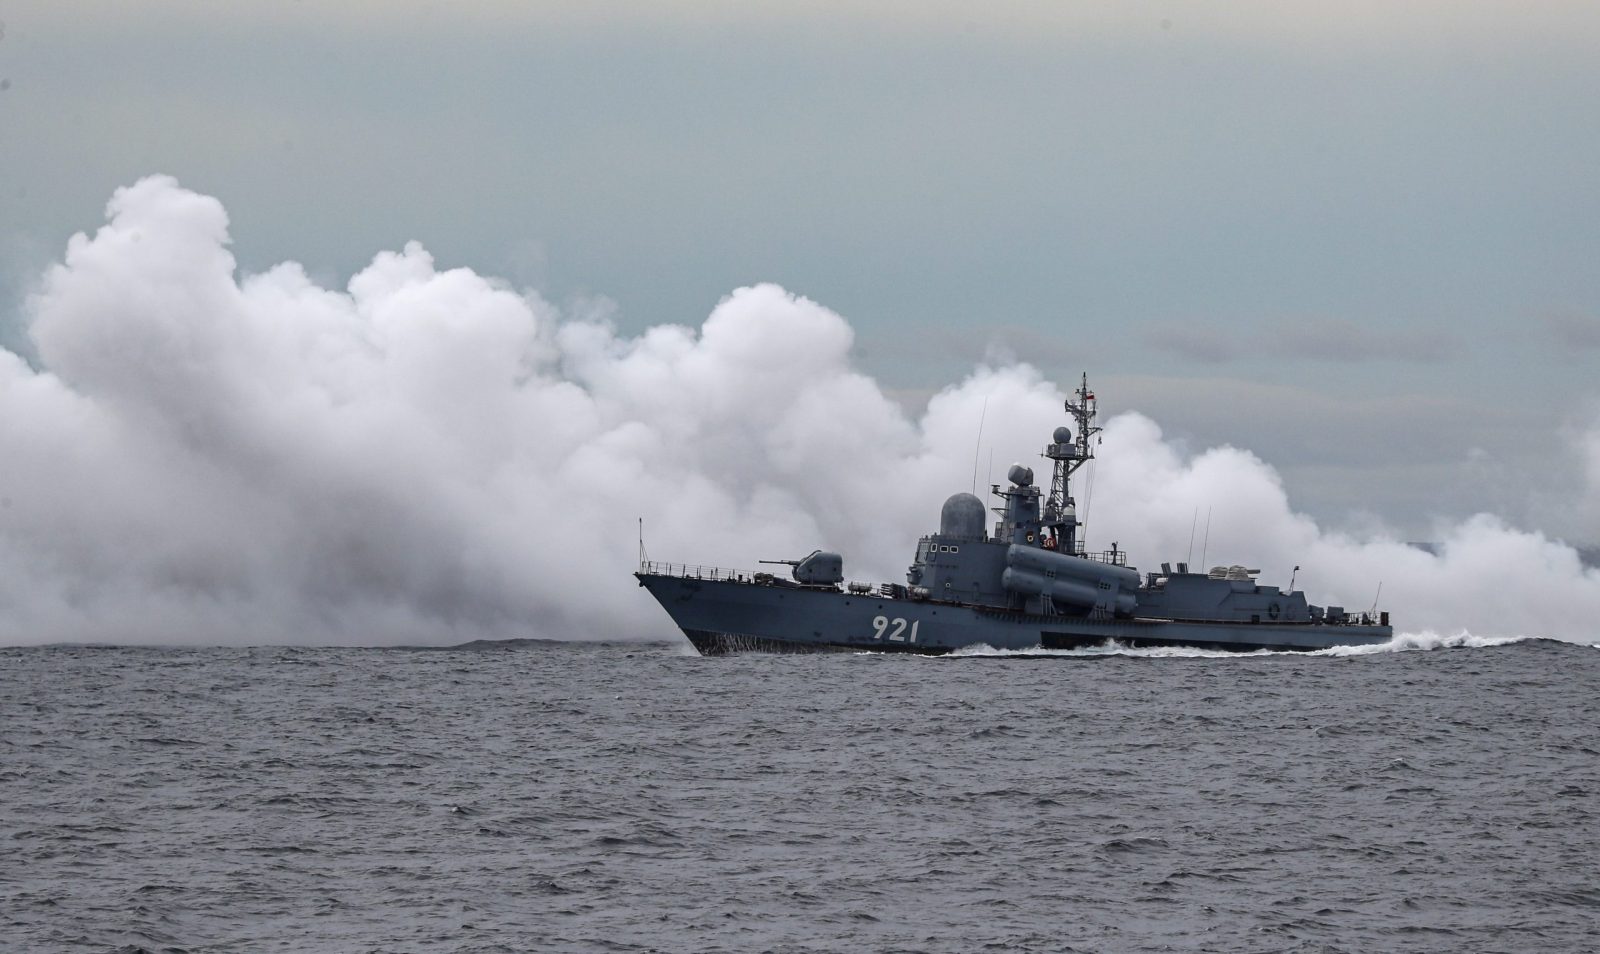 epa10160972 Russian missile boat project 12411 M releases a smoke screen during the Vostok 2022 strategic command and staff exercise in the Peter the Great Gulf of the Sea of Japan, near Vladivostok, Russia, 05 September 2022. The Vostok 2022 strategic command and staff exercise will take place from 01 to 07 September 2022 and will involve over 50,000 servicemen and more than 5,000 units of weapons and military equipment.  EPA/YURI KOCHETKOV